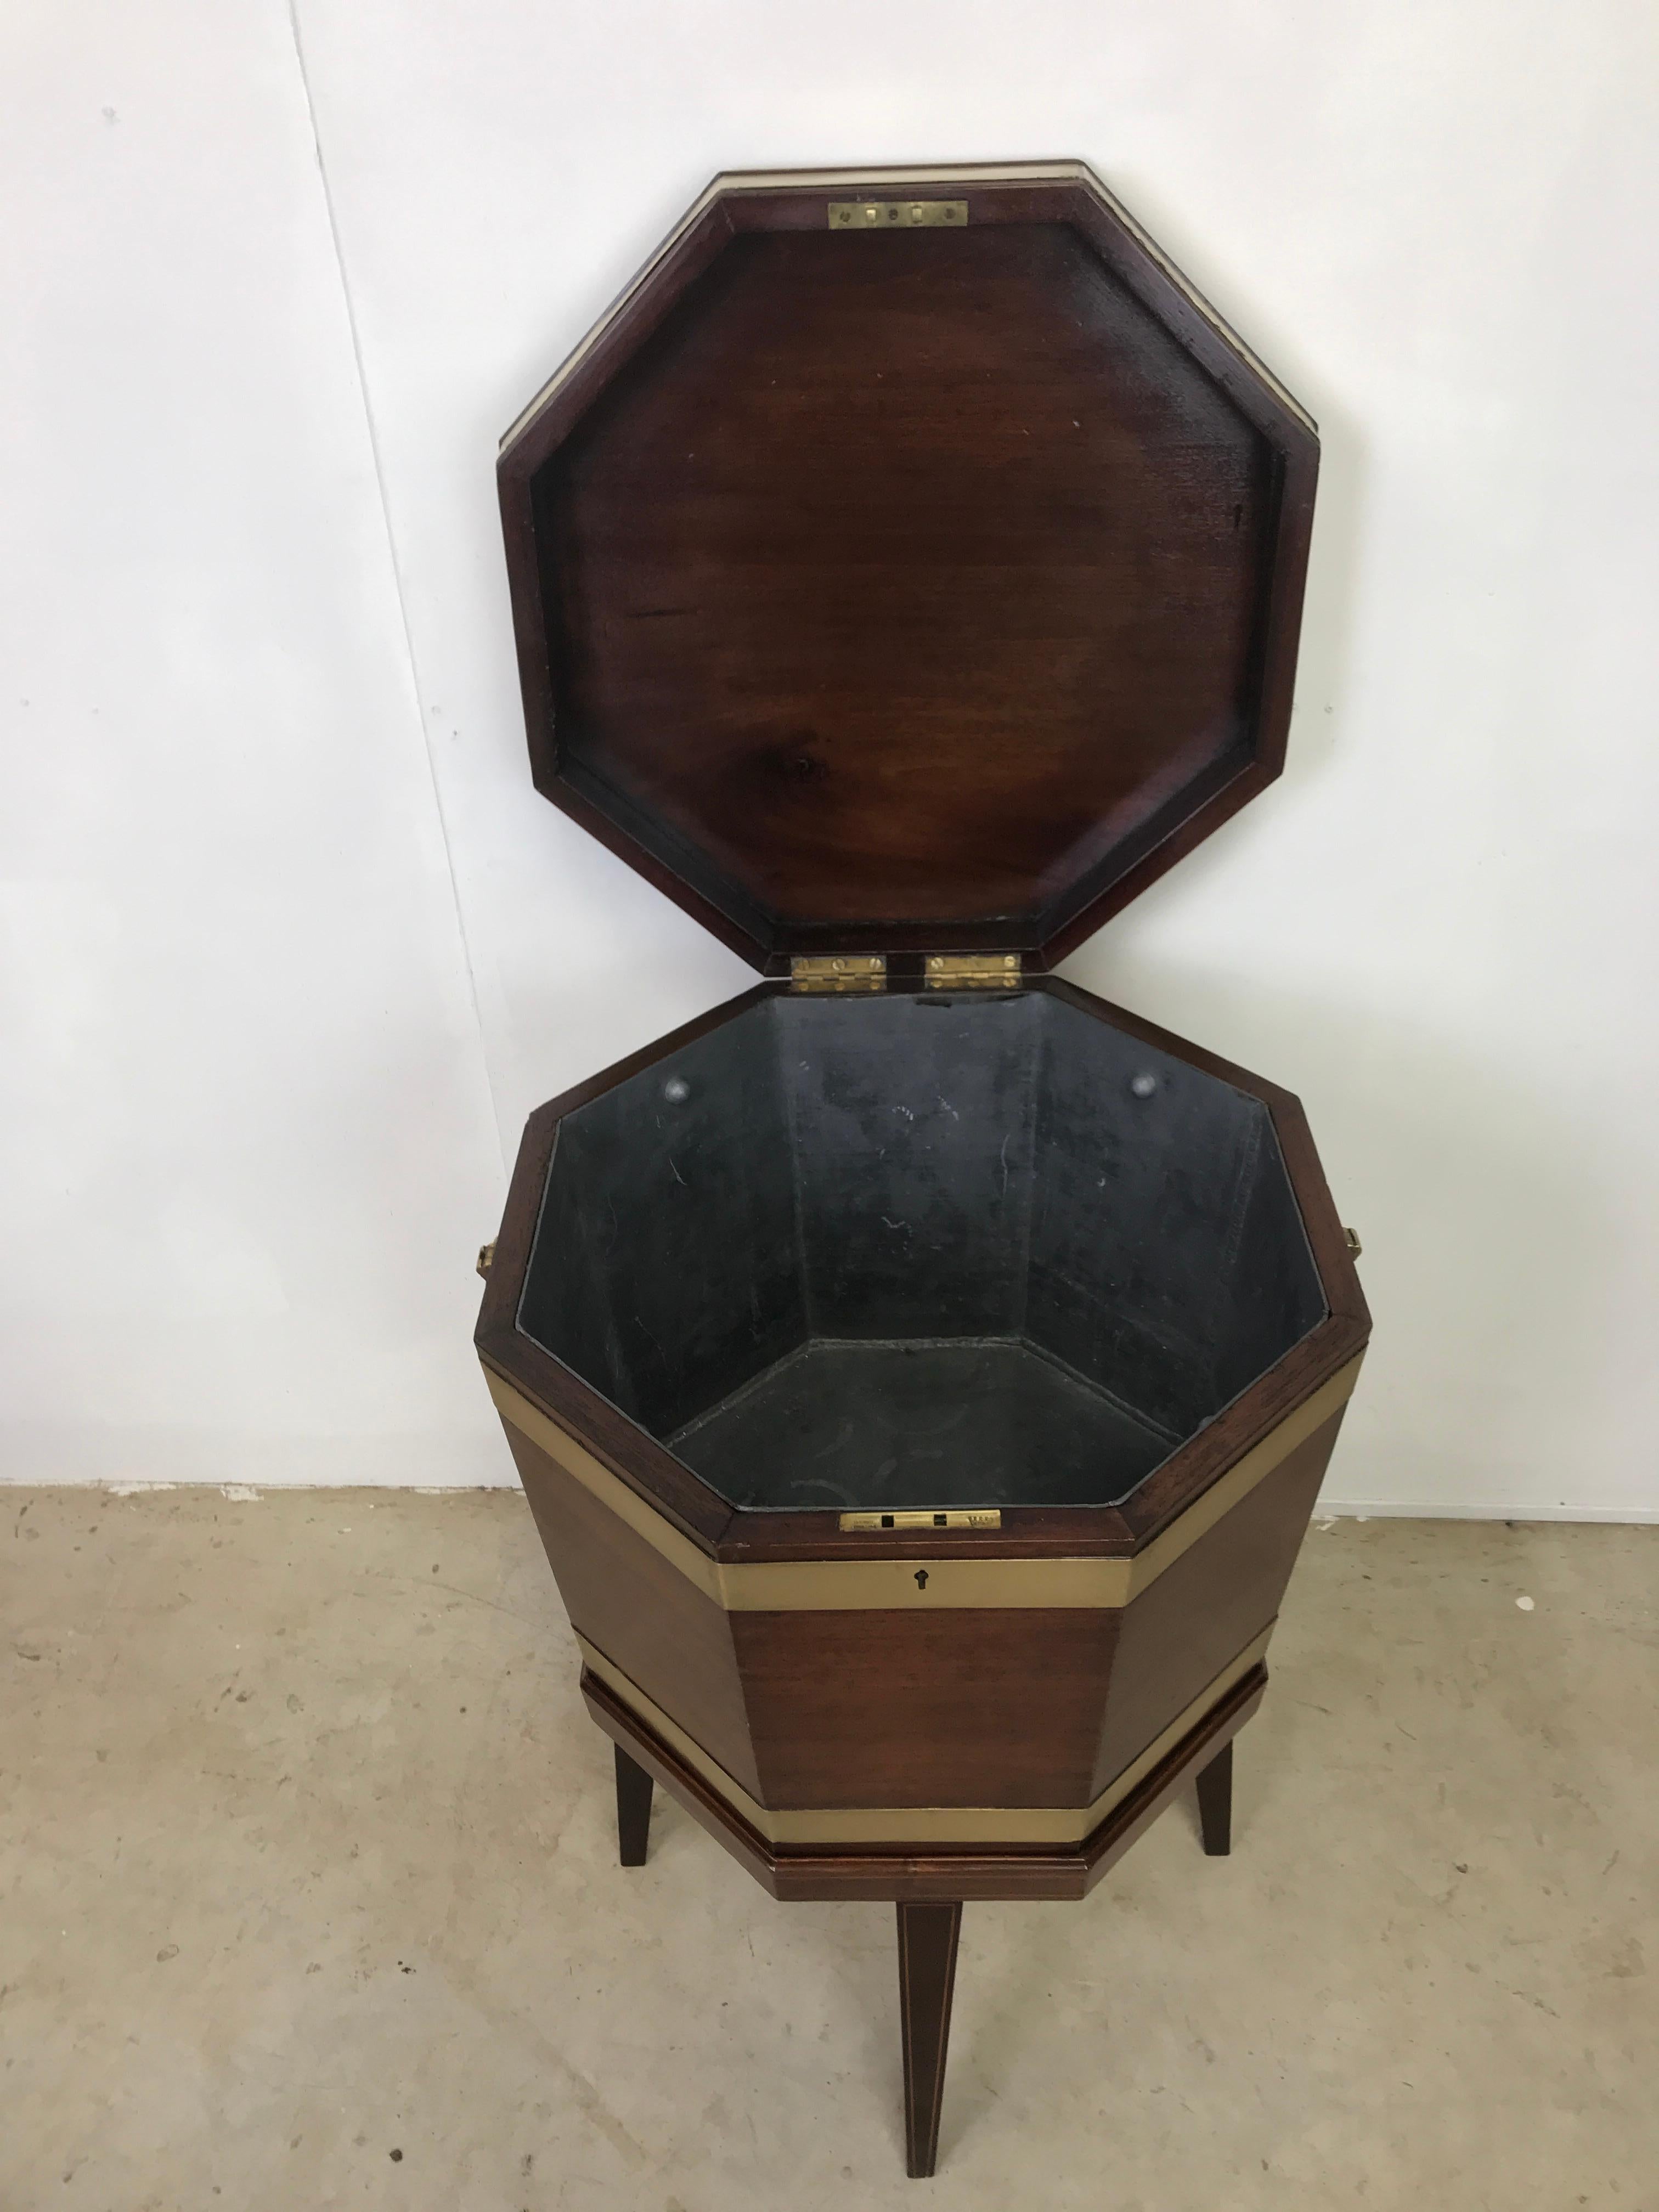 A very nice large Georgian mahogany octagonal wine cooler with brass bands and handles
This one has a drain in the base to make it very easy after your ice has melted to drain
It has being cleaned and polished and is ready for your Wine.